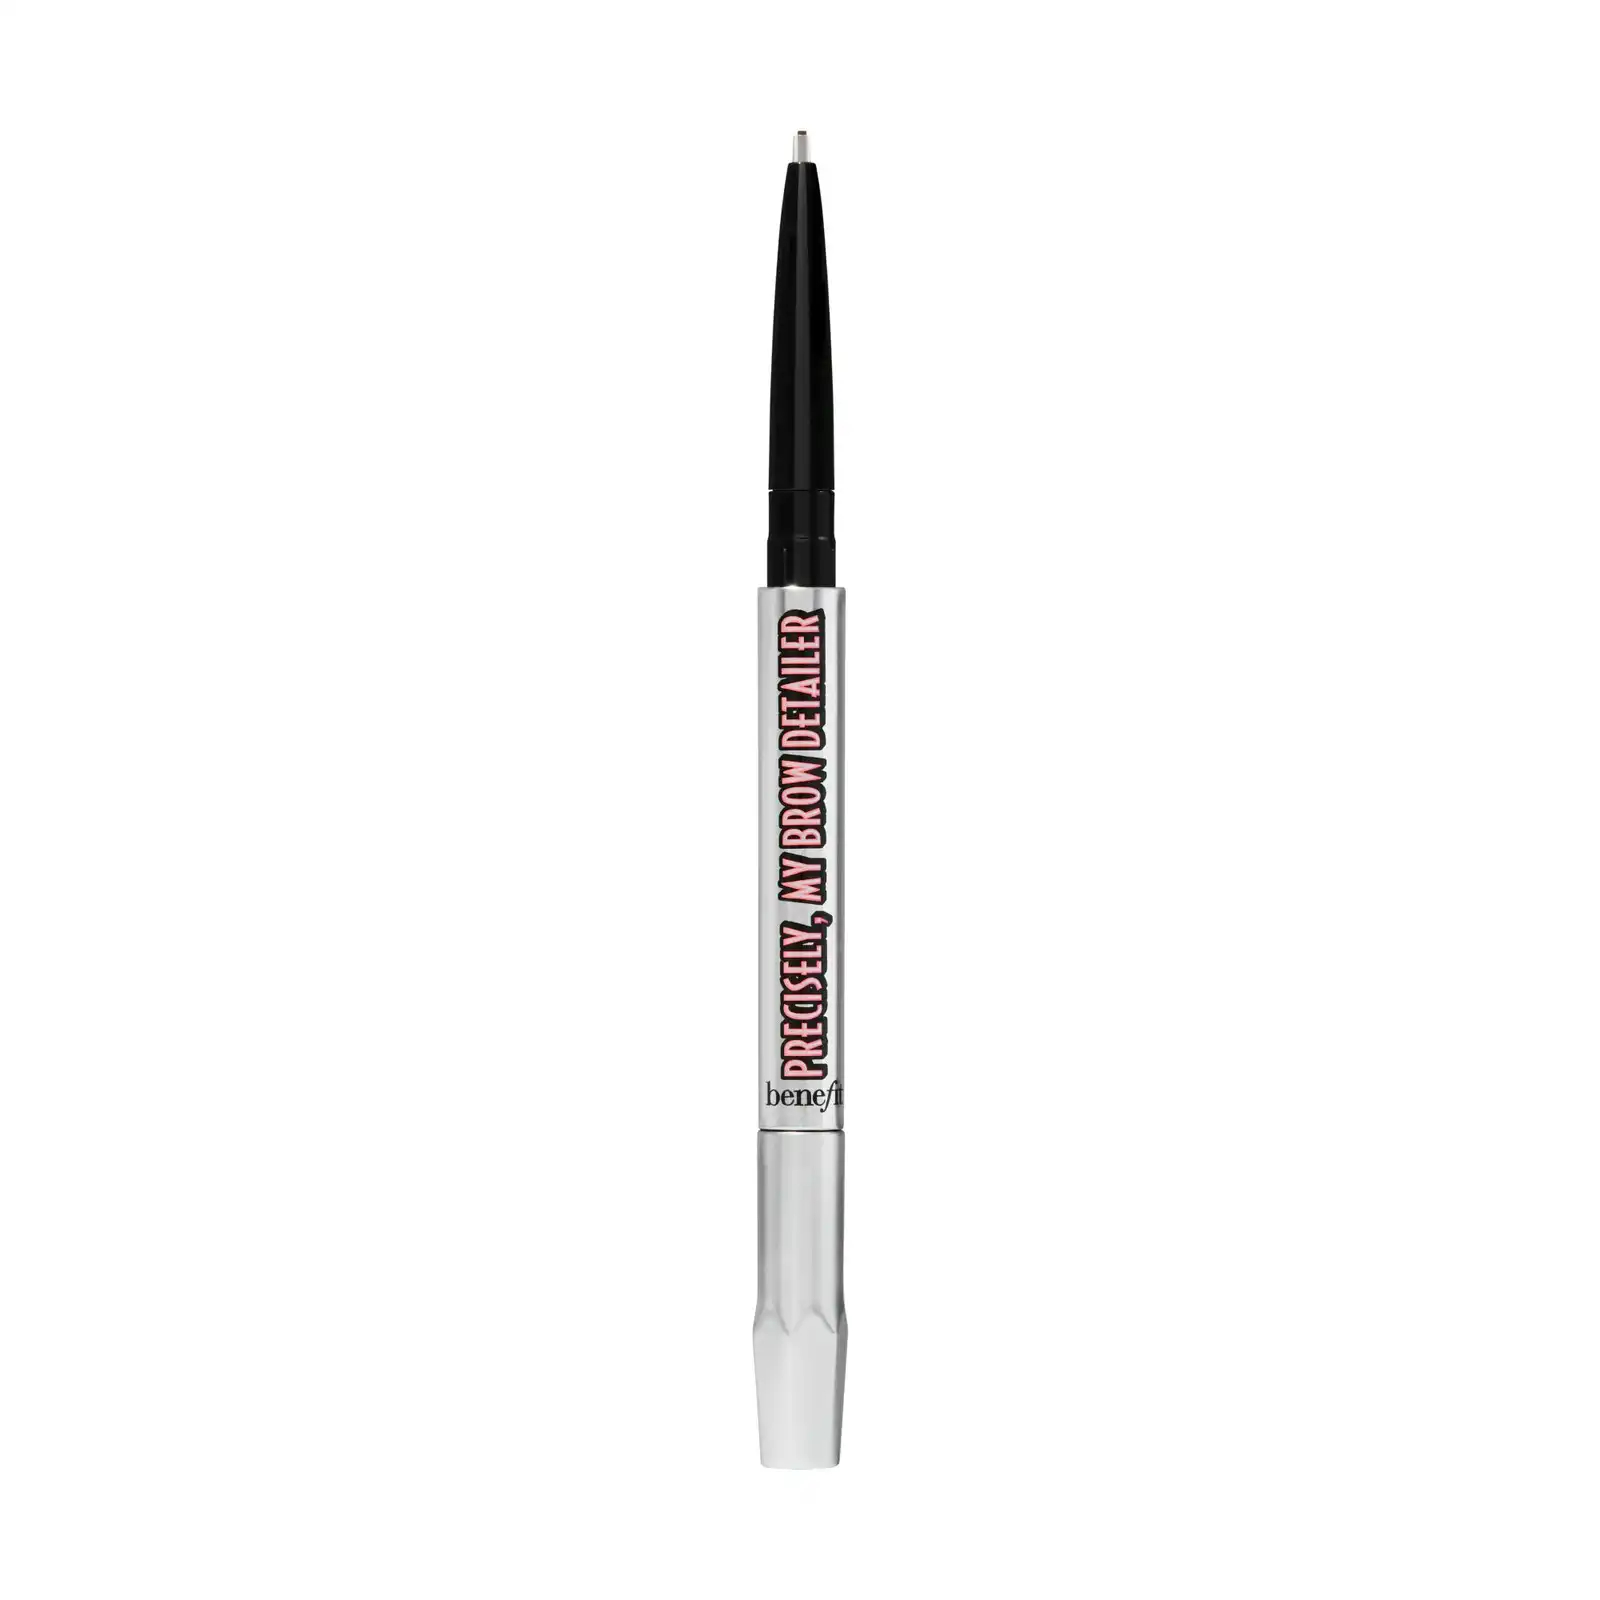 Benefit Cosmetics Precisely My Brow Detailer Shade 2.5